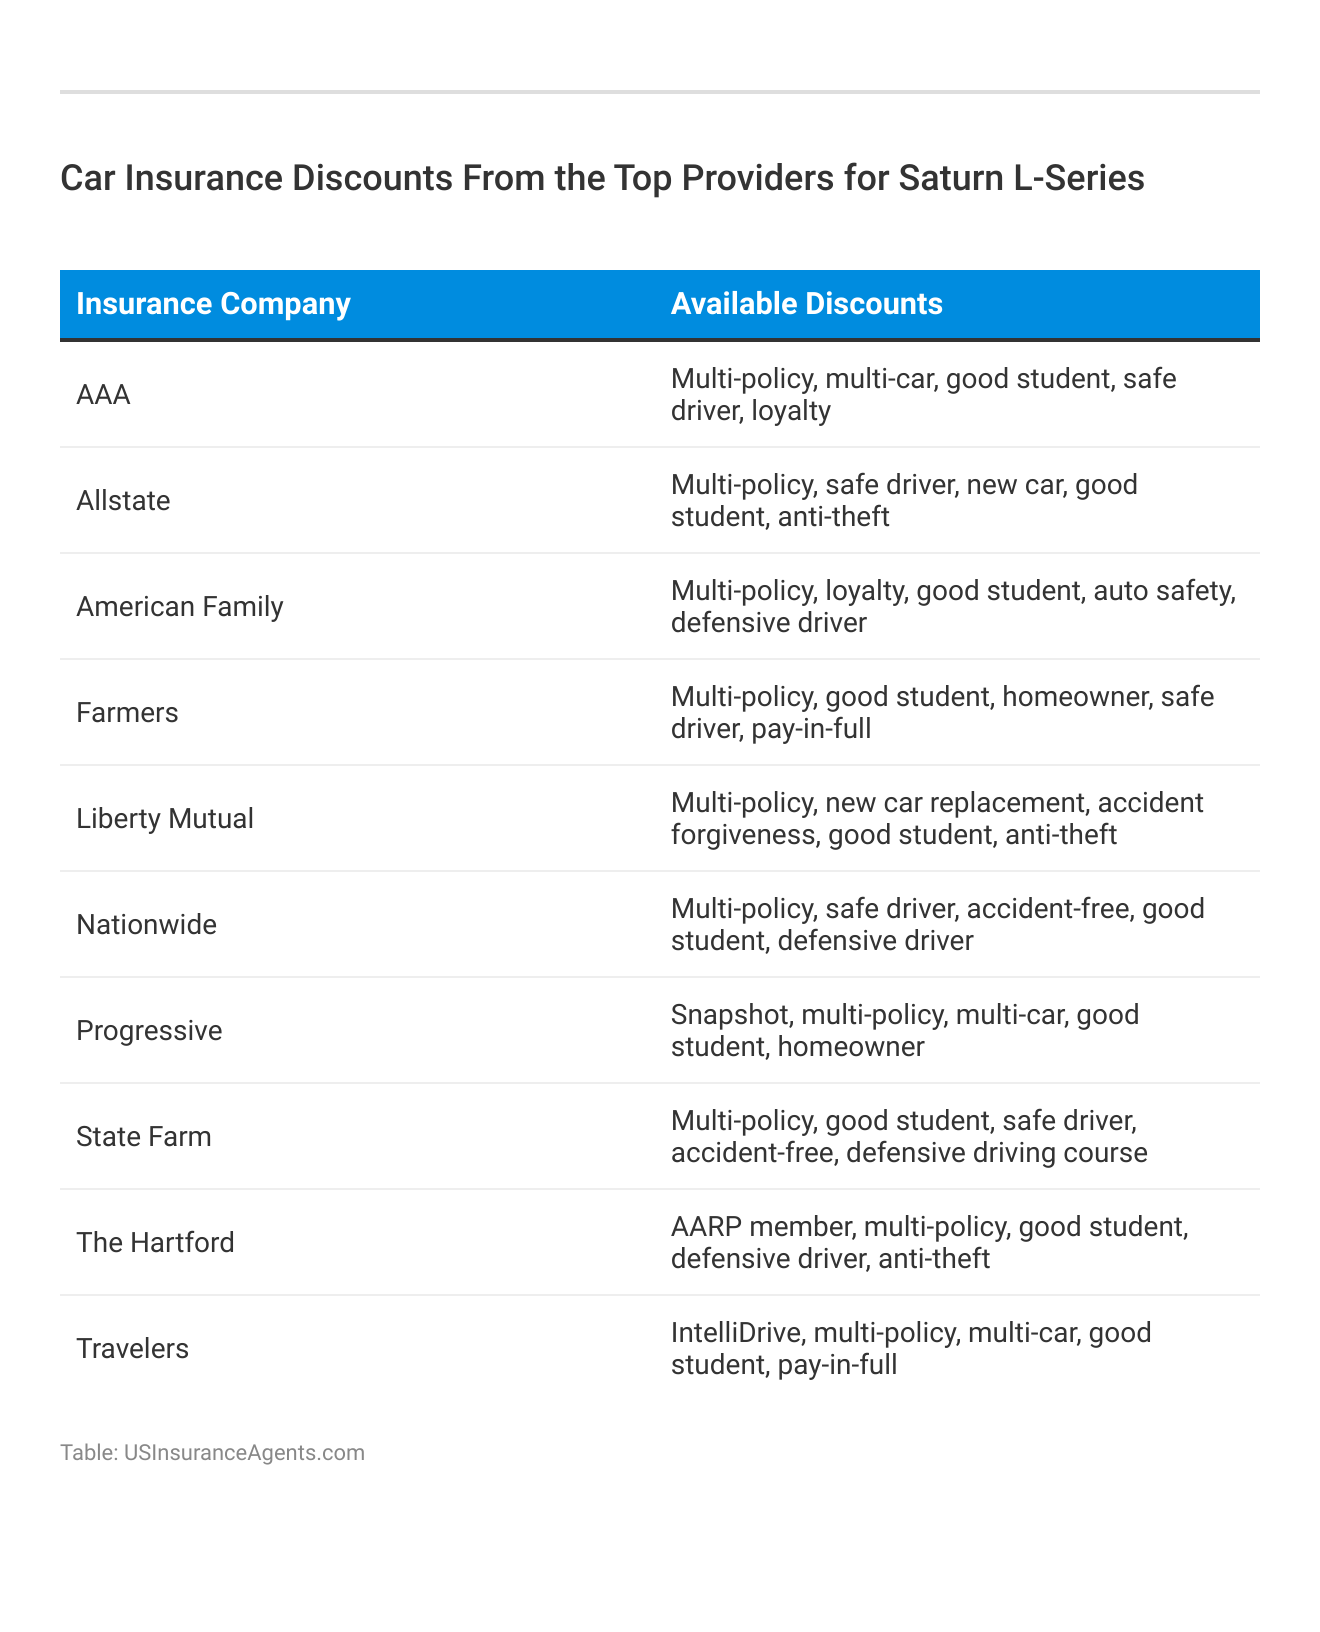 <h3>Car Insurance Discounts From the Top Providers for Saturn L-Series</h3>